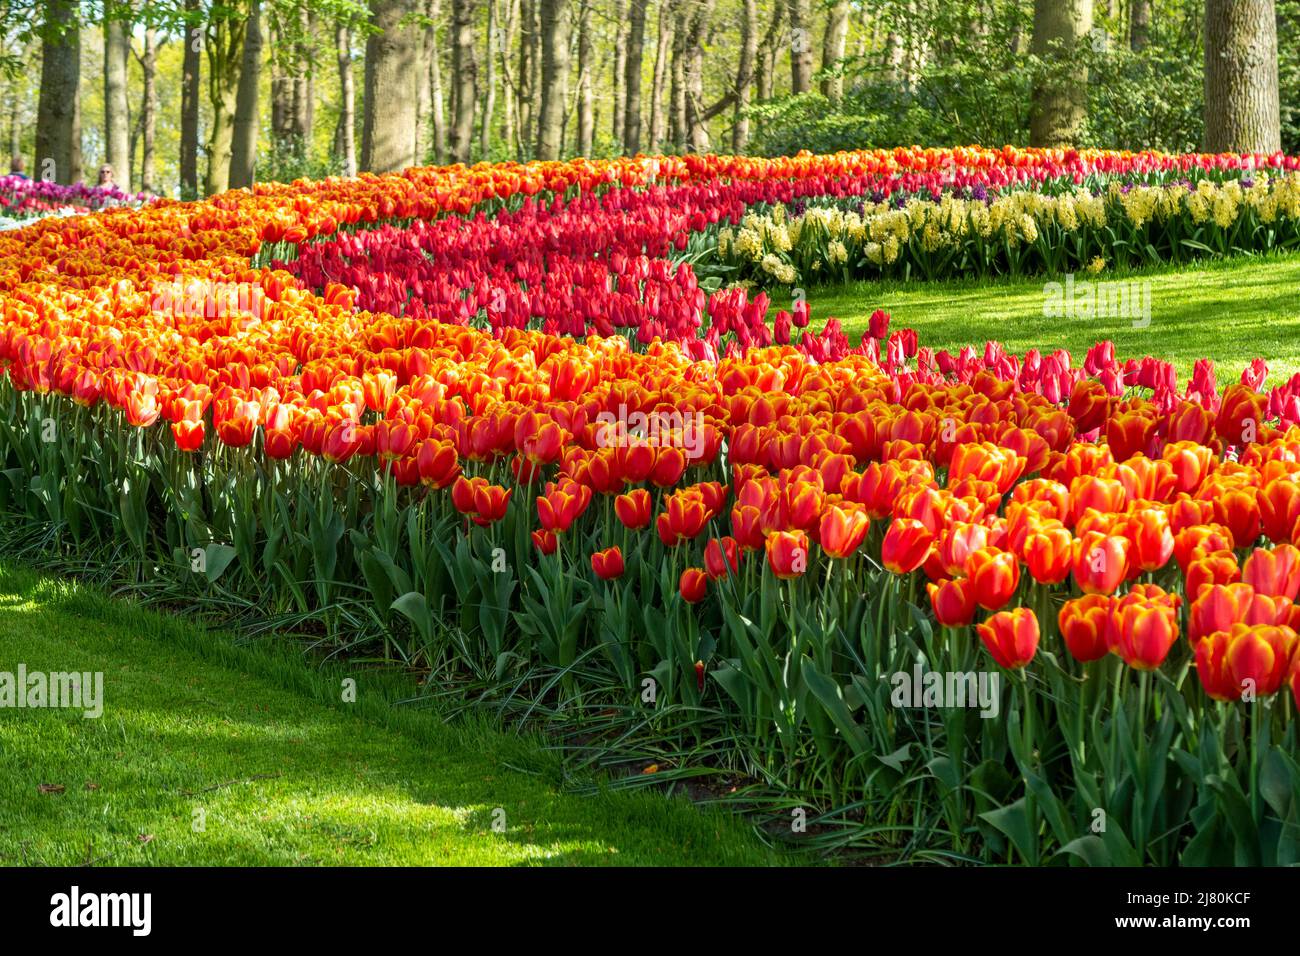 Keukenhof Park aka the Garden of Europe, is one of the world's largest flower gardens, situated in the municipality of Lisse, in the Netherlands Stock Photo